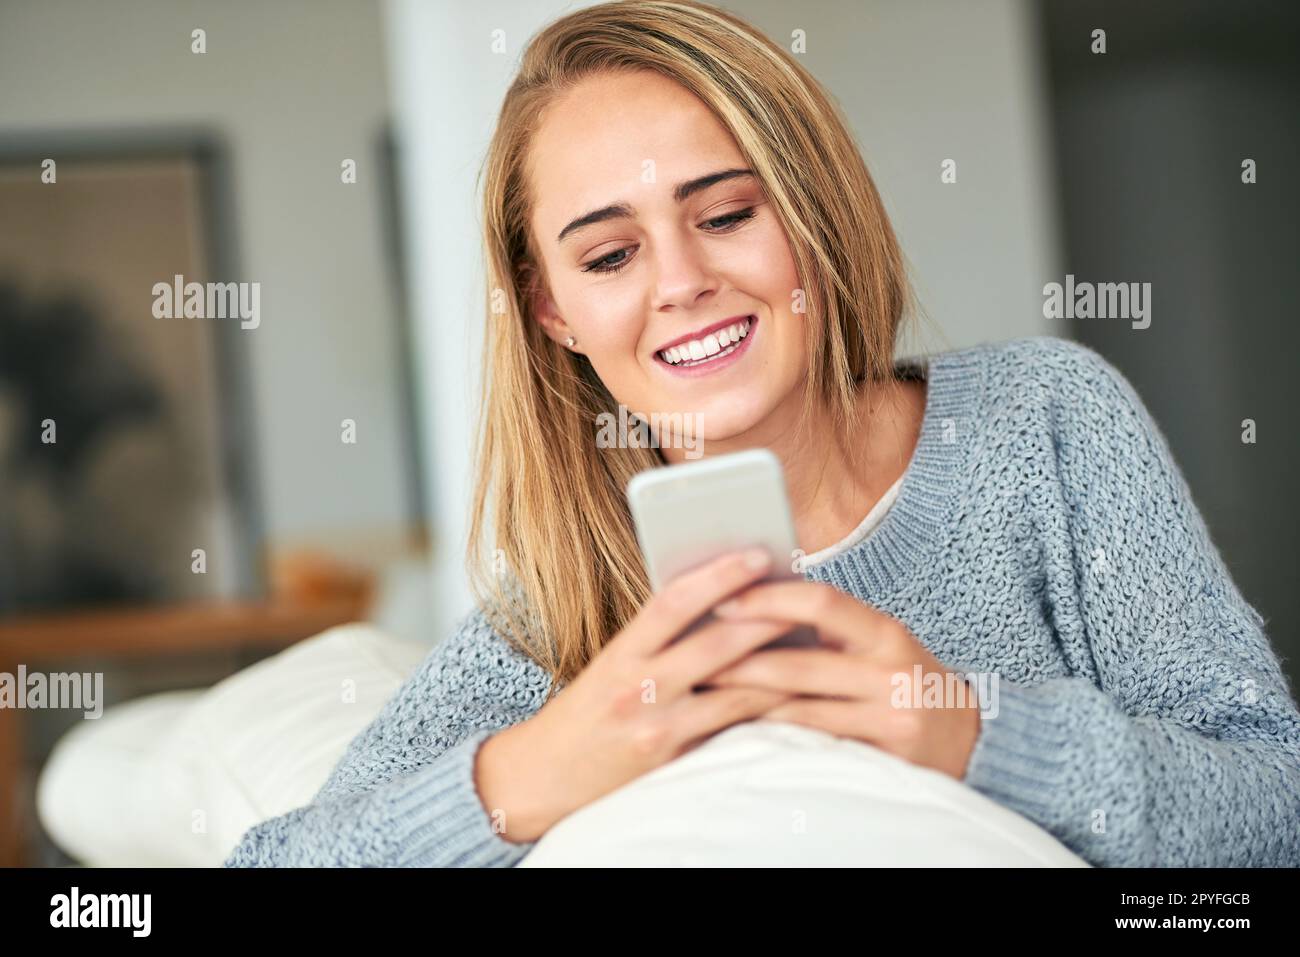 Some texts have the power to make your day. an attractive young woman sending a text message while chilling at home. Stock Photo